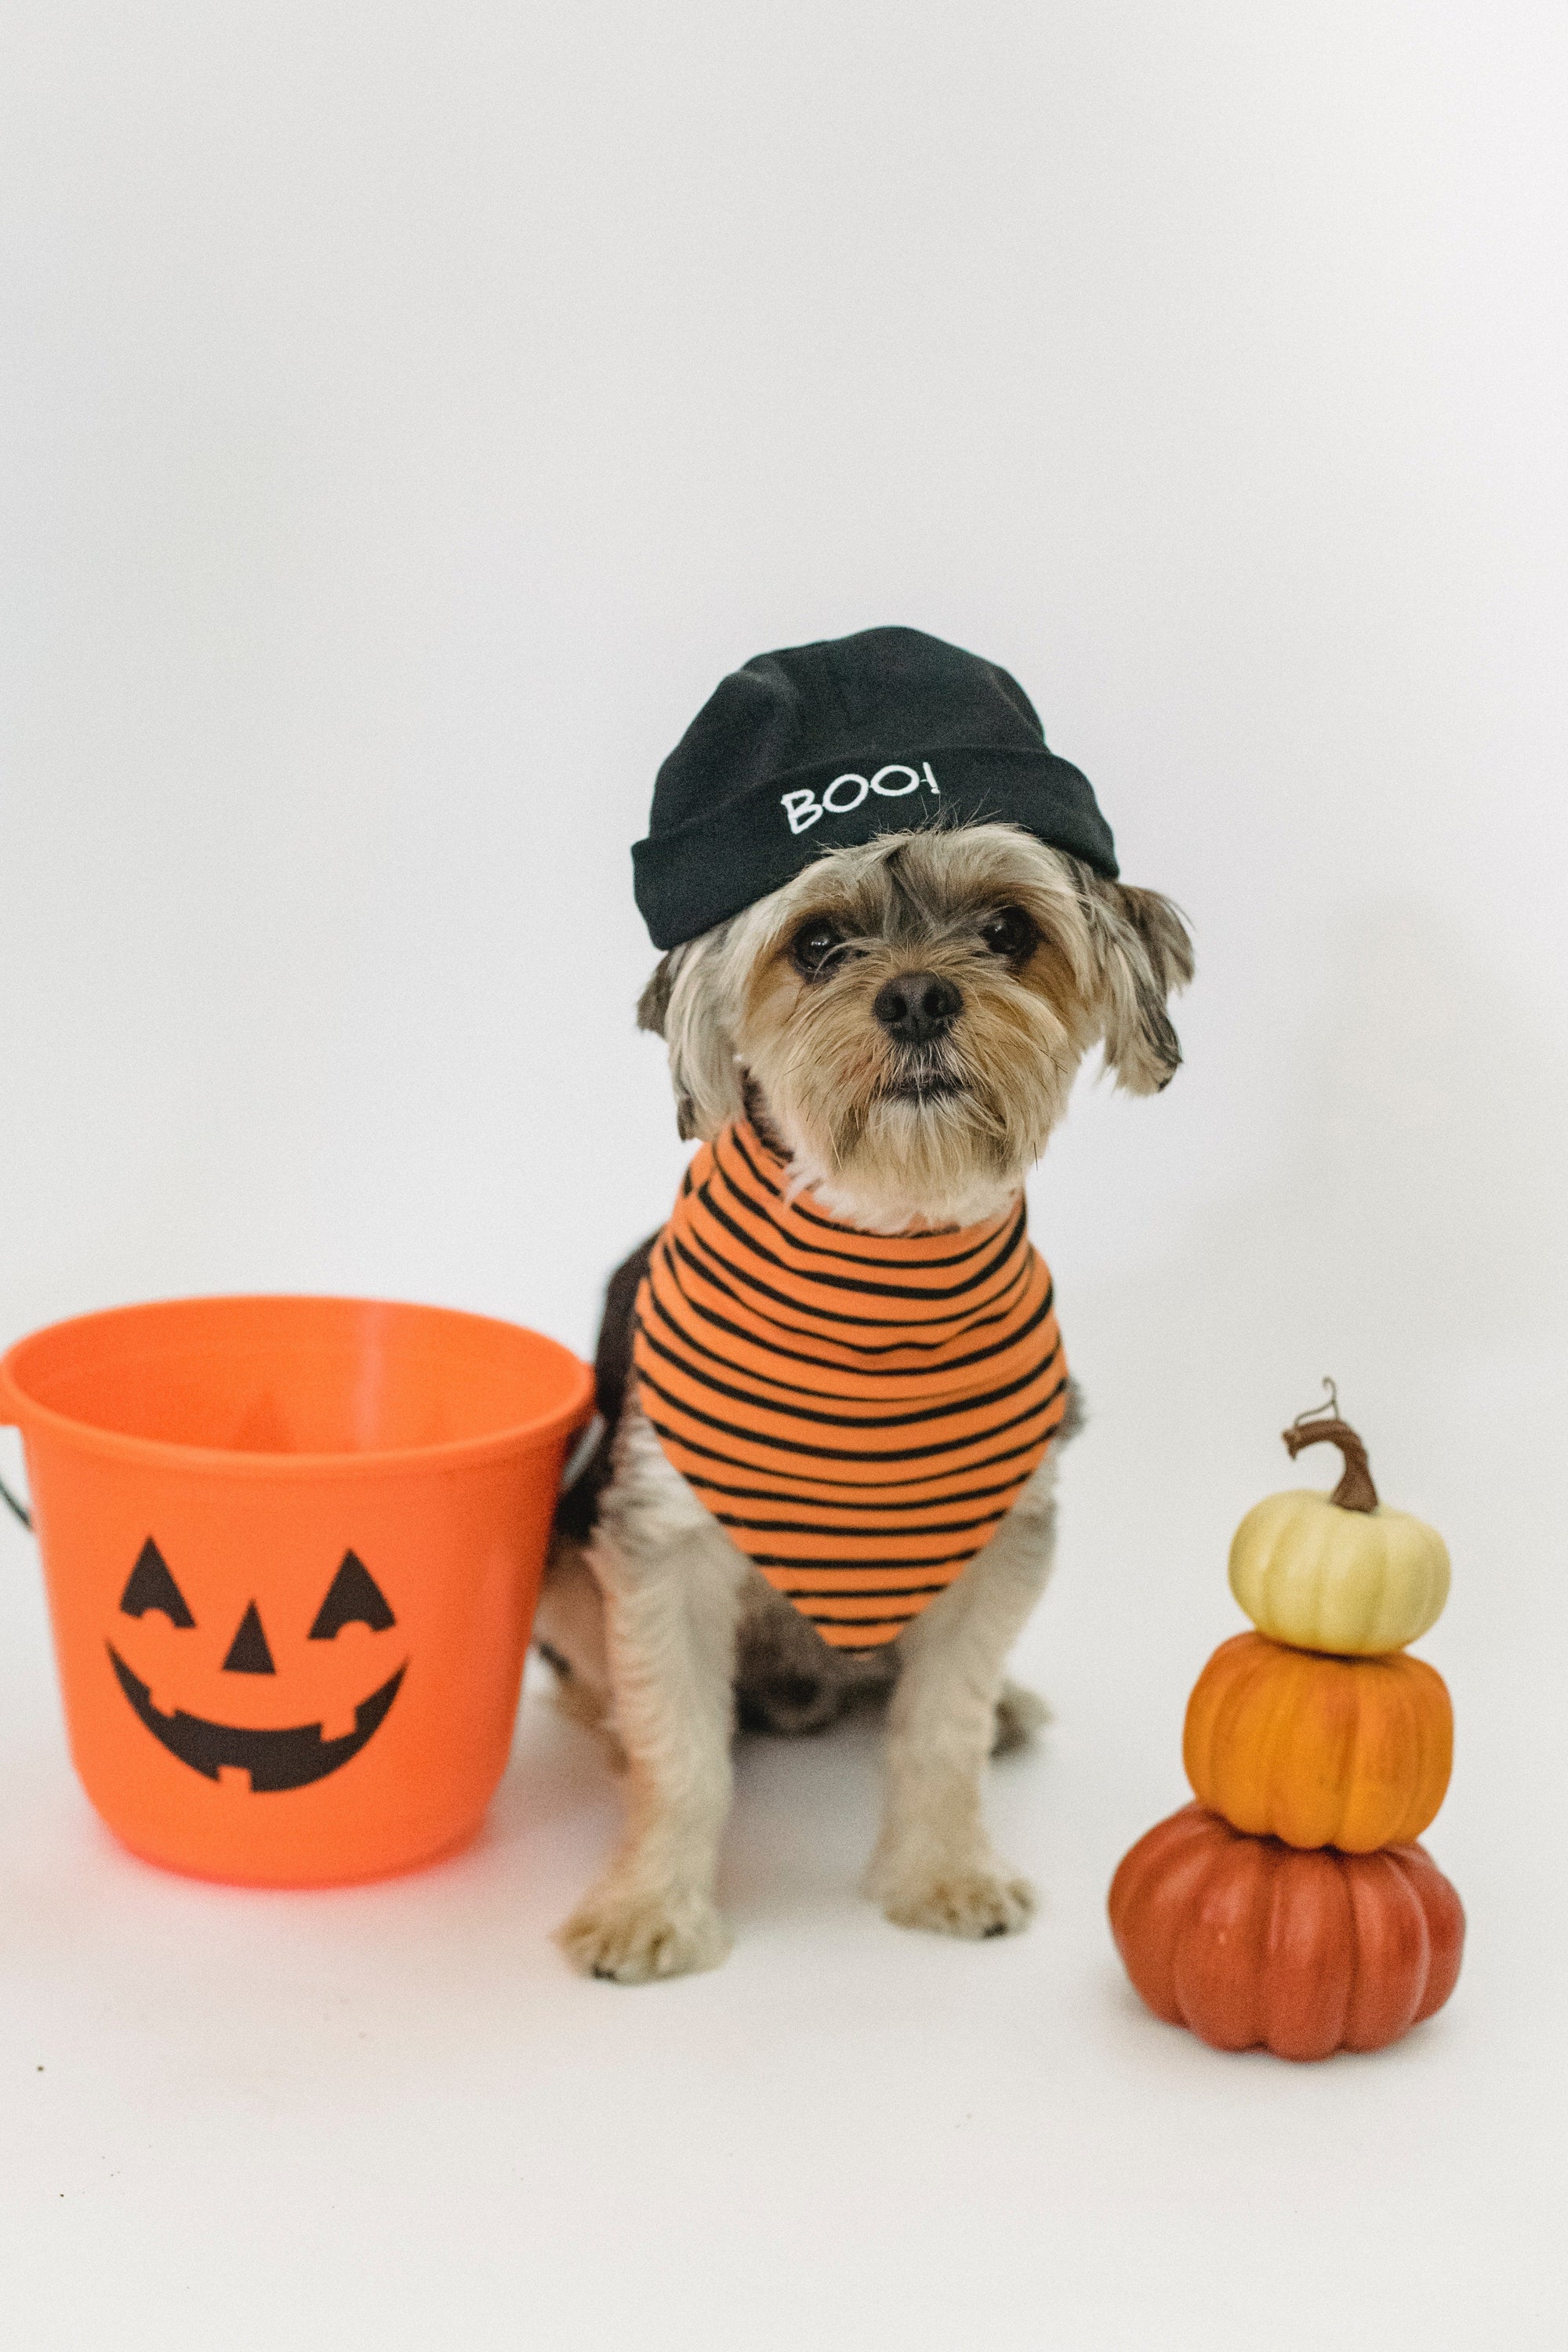 Fangtastic Halloween costume ideas for your pup - KindTail